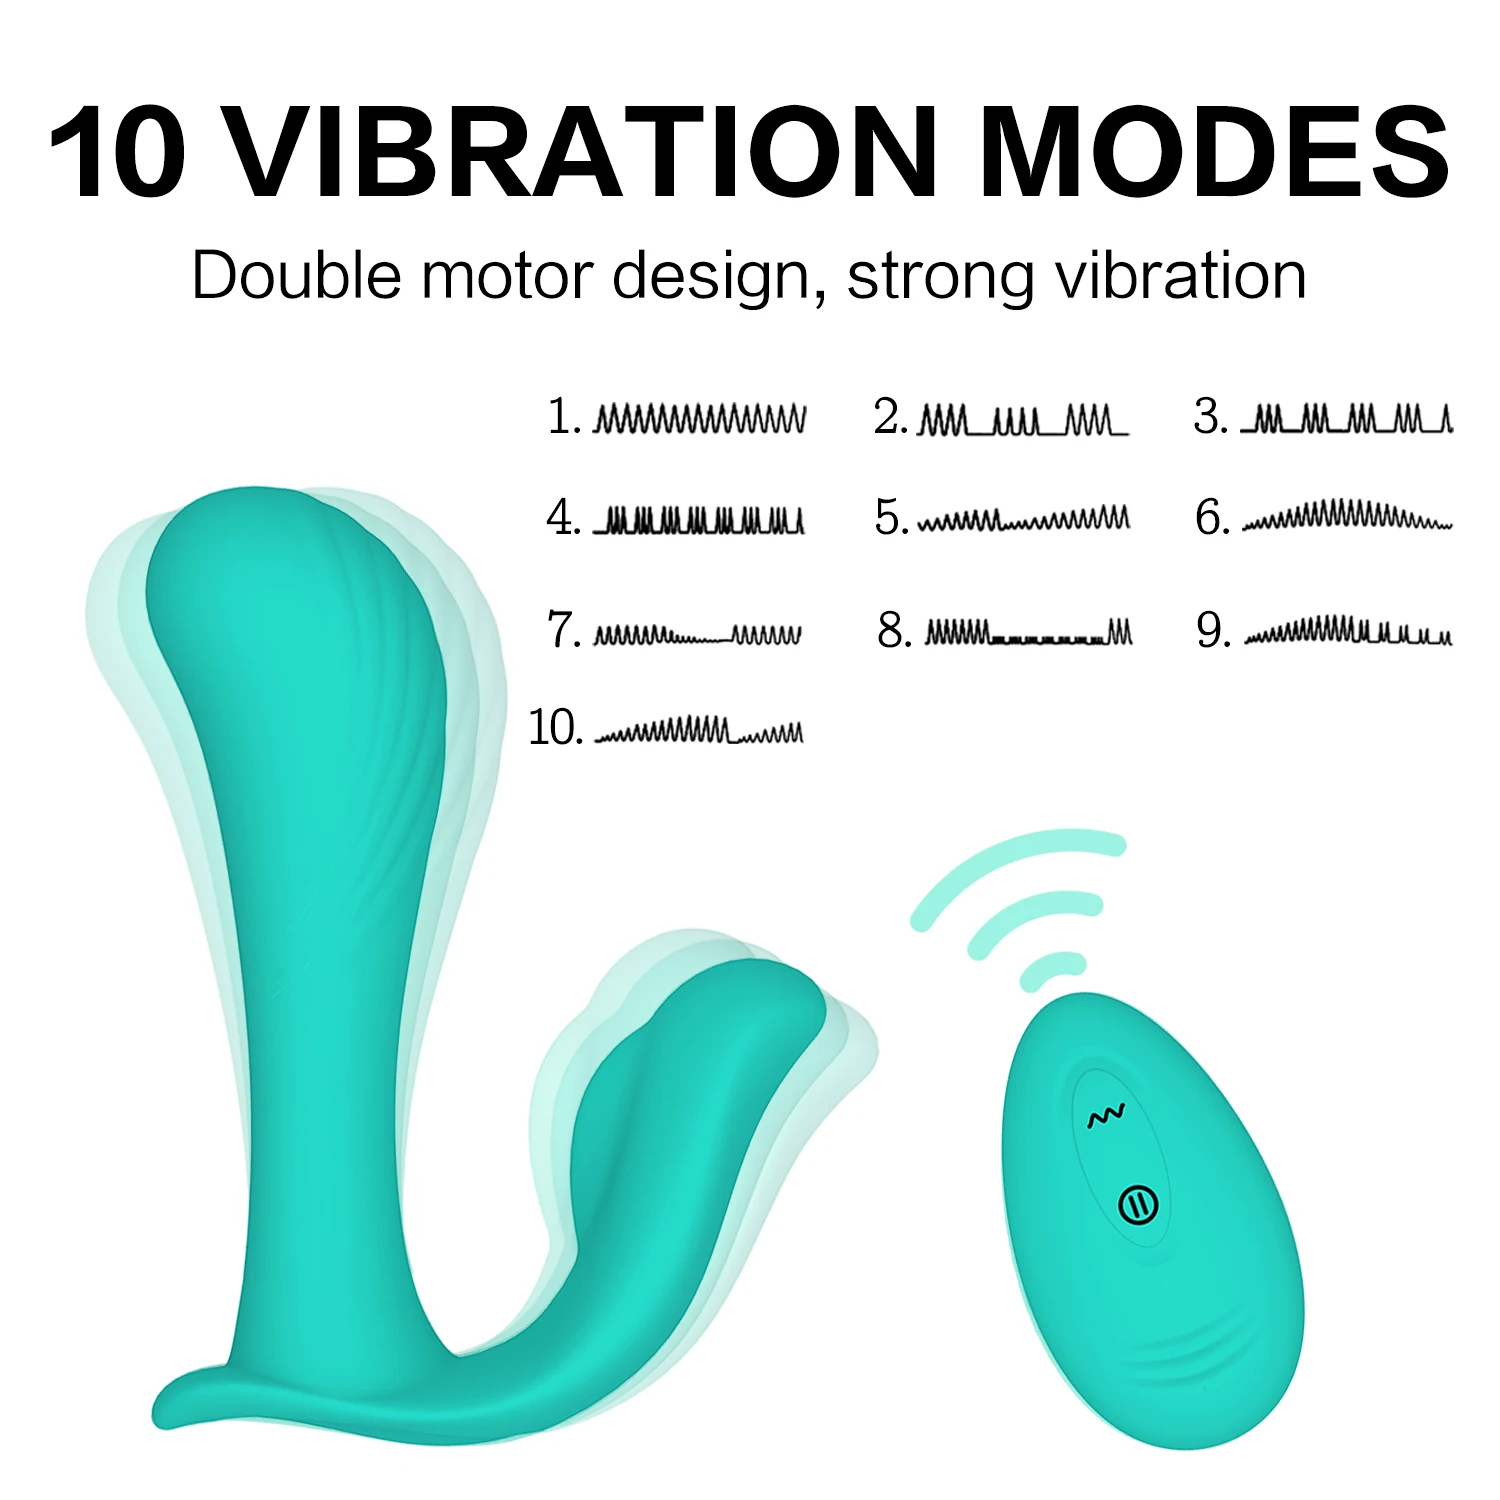 Multi Vibration Modes Wearable Vibrators for Women, Whisper Silent Panty  Female Adult Sex Toys for Women Her Couples Play G Spot Clitoral Panties  Vibrators for Underwear 